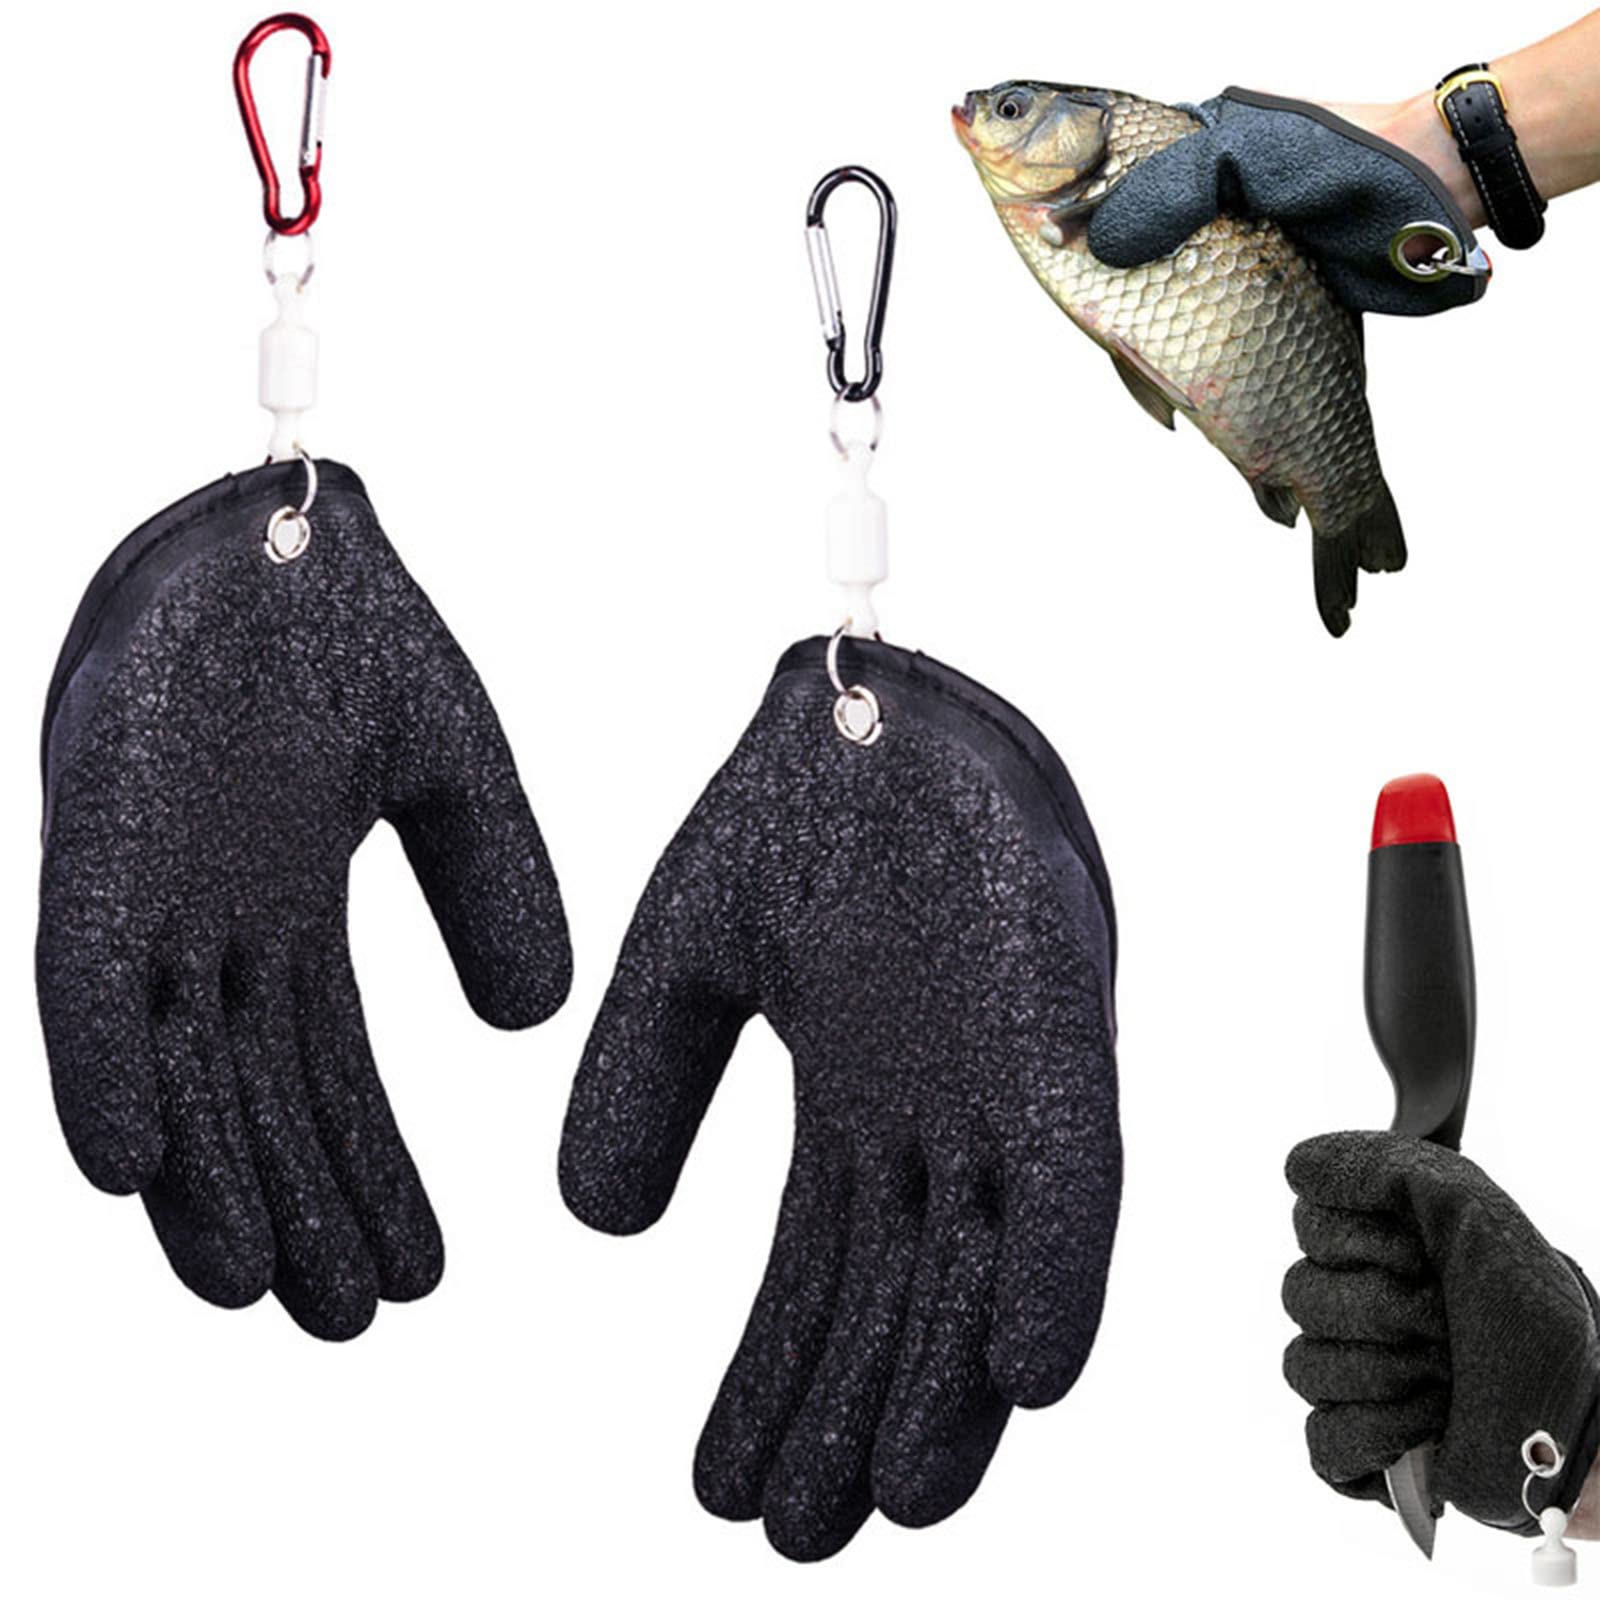 Eurmali 2Pcs Fishing Catching Gloves, Fishing Glove with Magnet Release,  Fisherman Professional Catch Fish Gloves, Anti